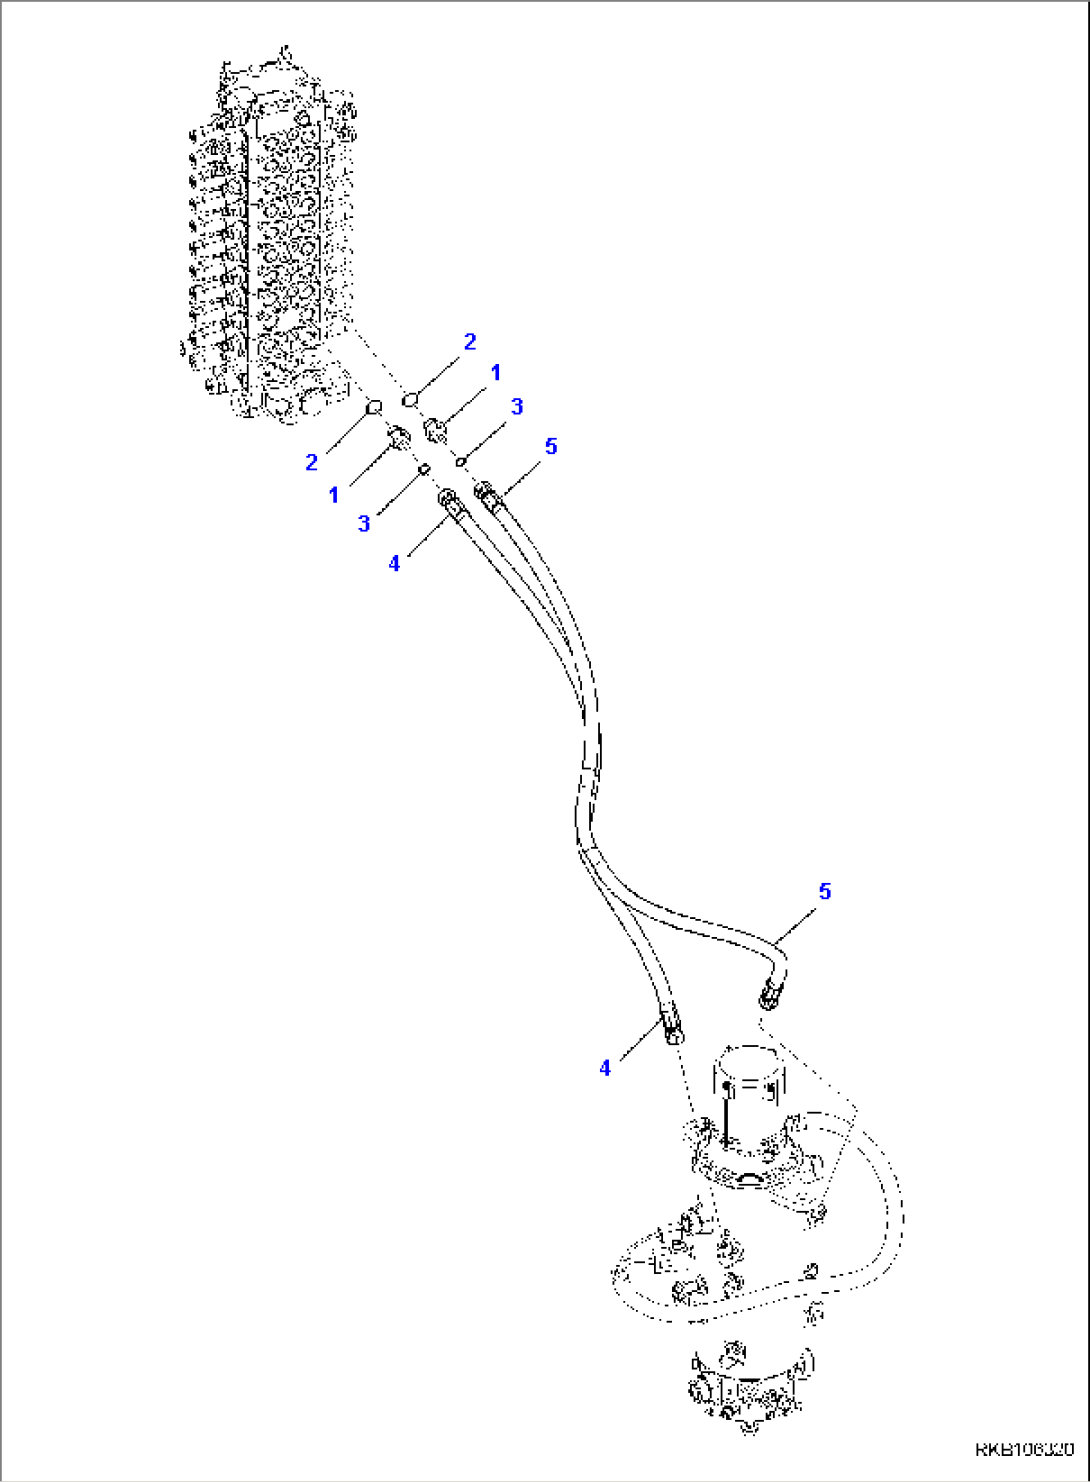 OUTRIGGER OR BLADE PIPING, UPPER LINE